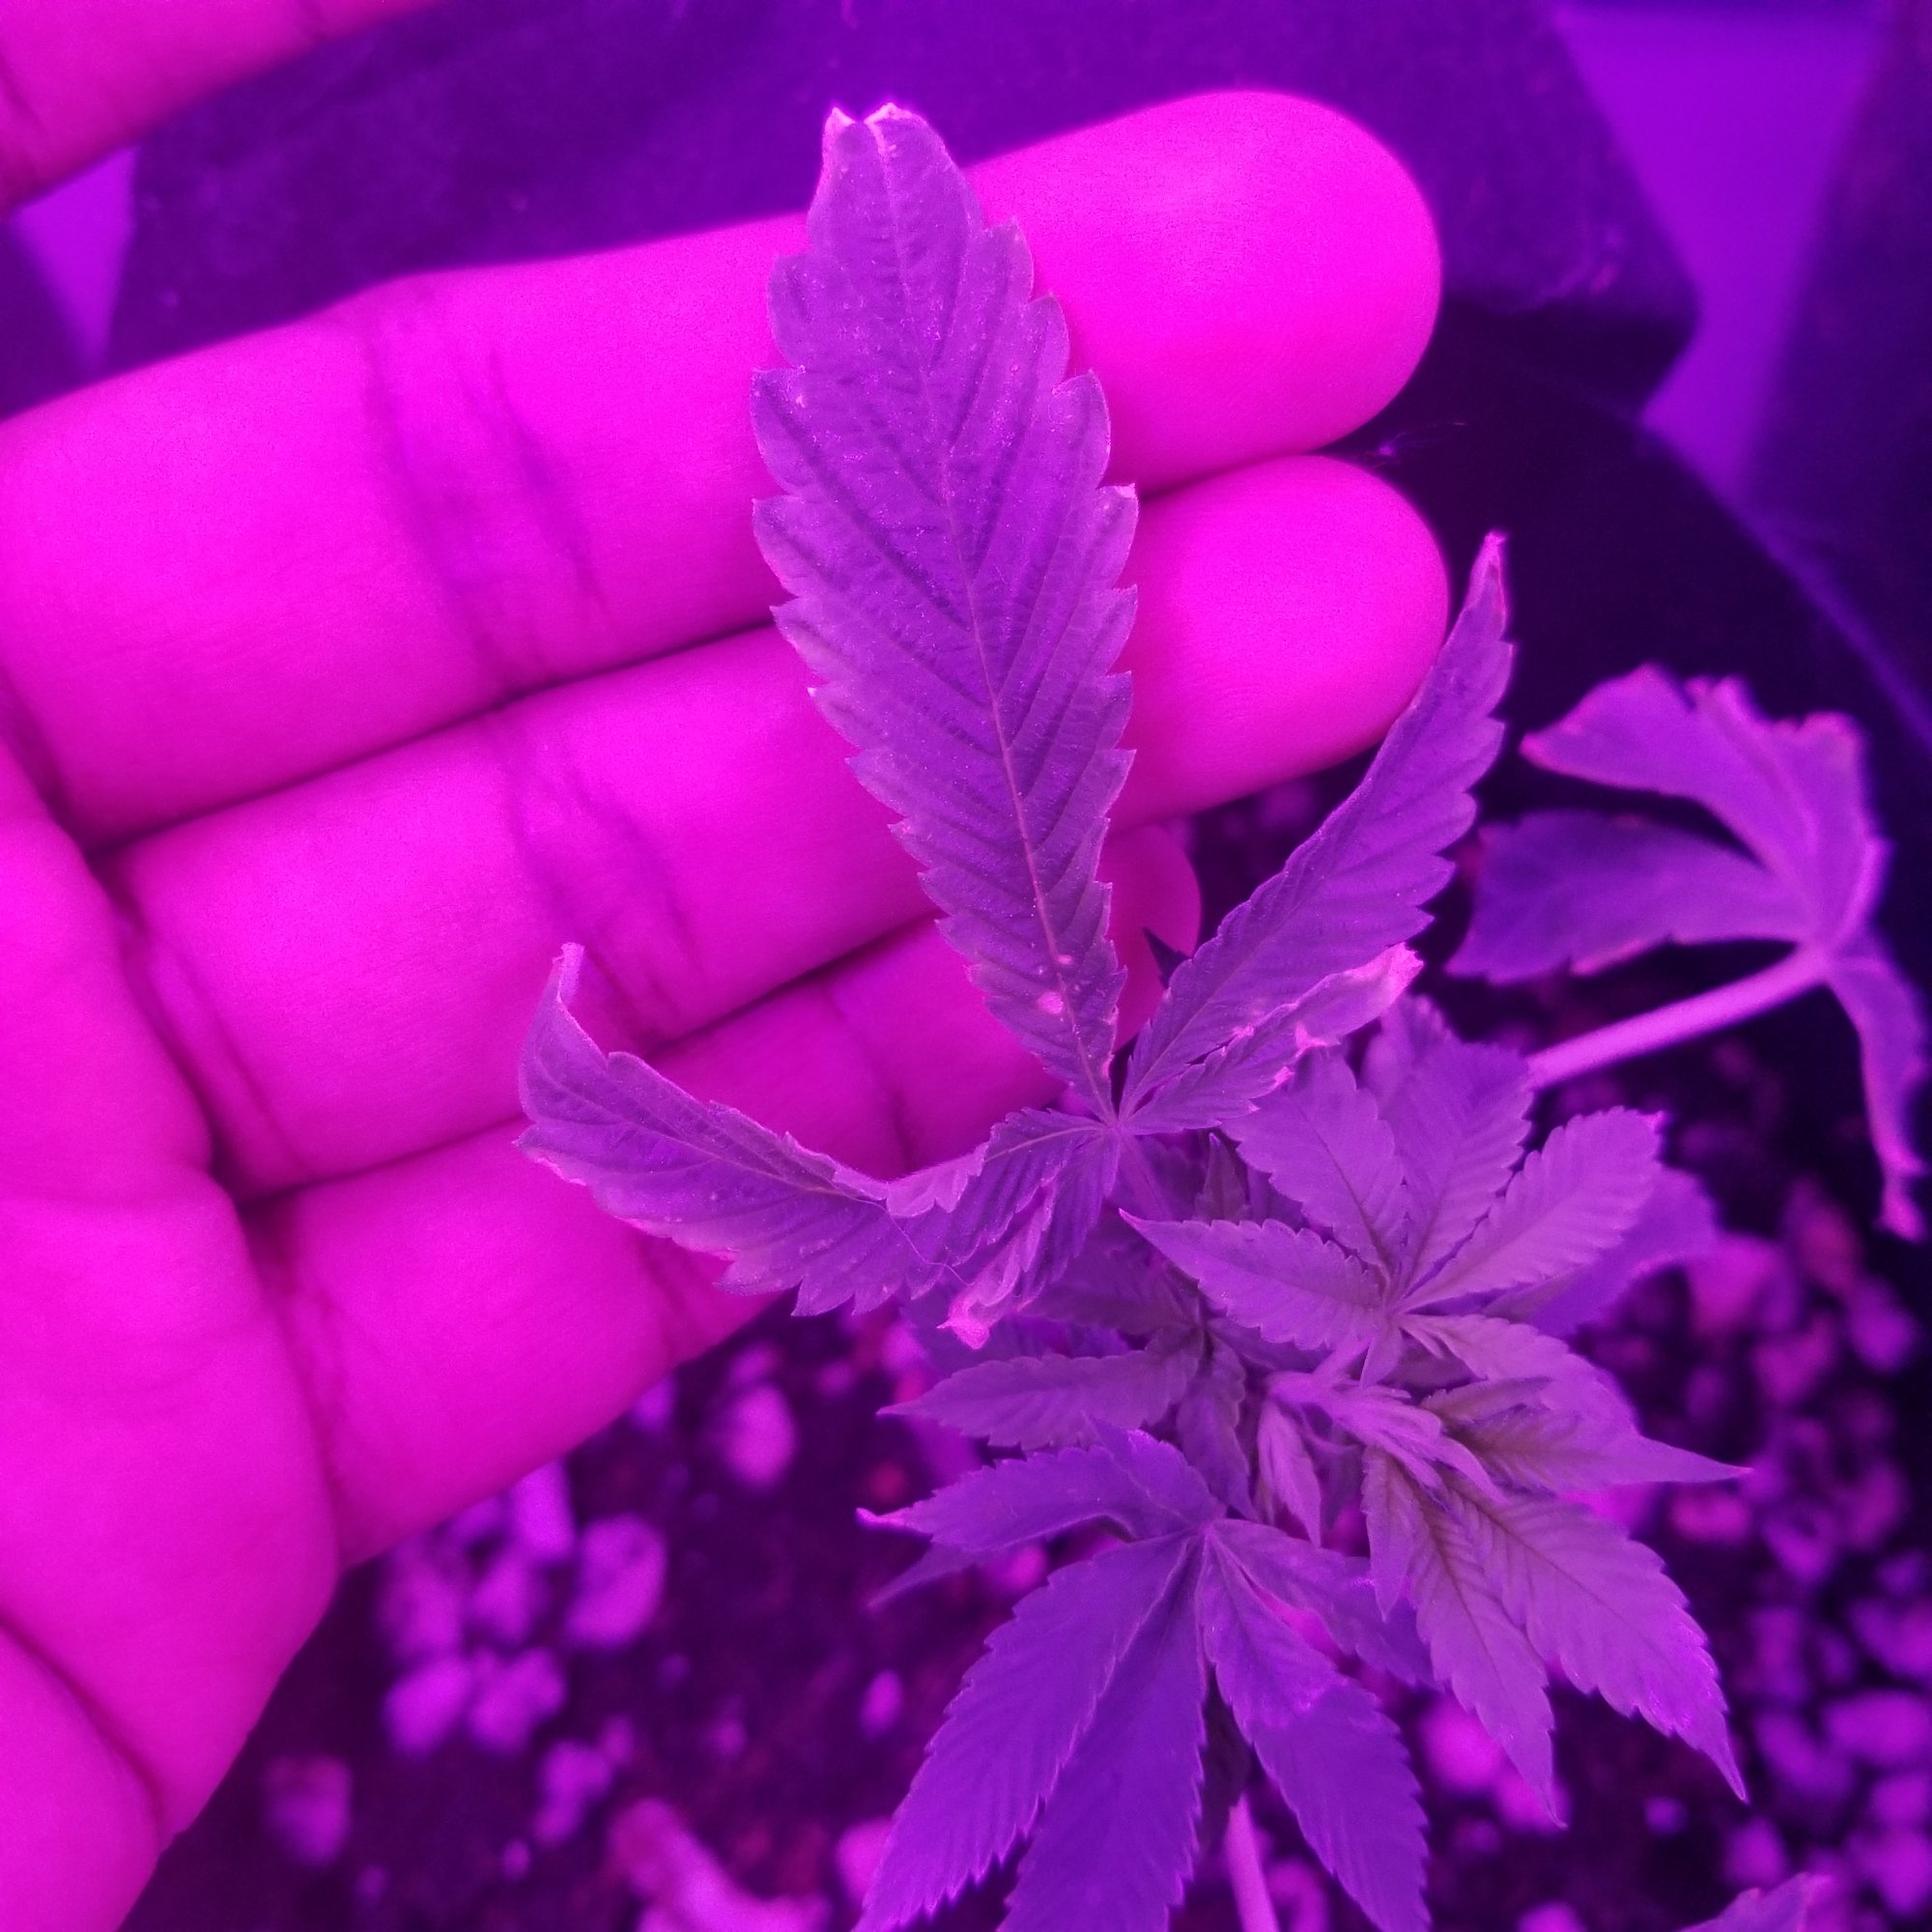 Are my clones dying please help 6